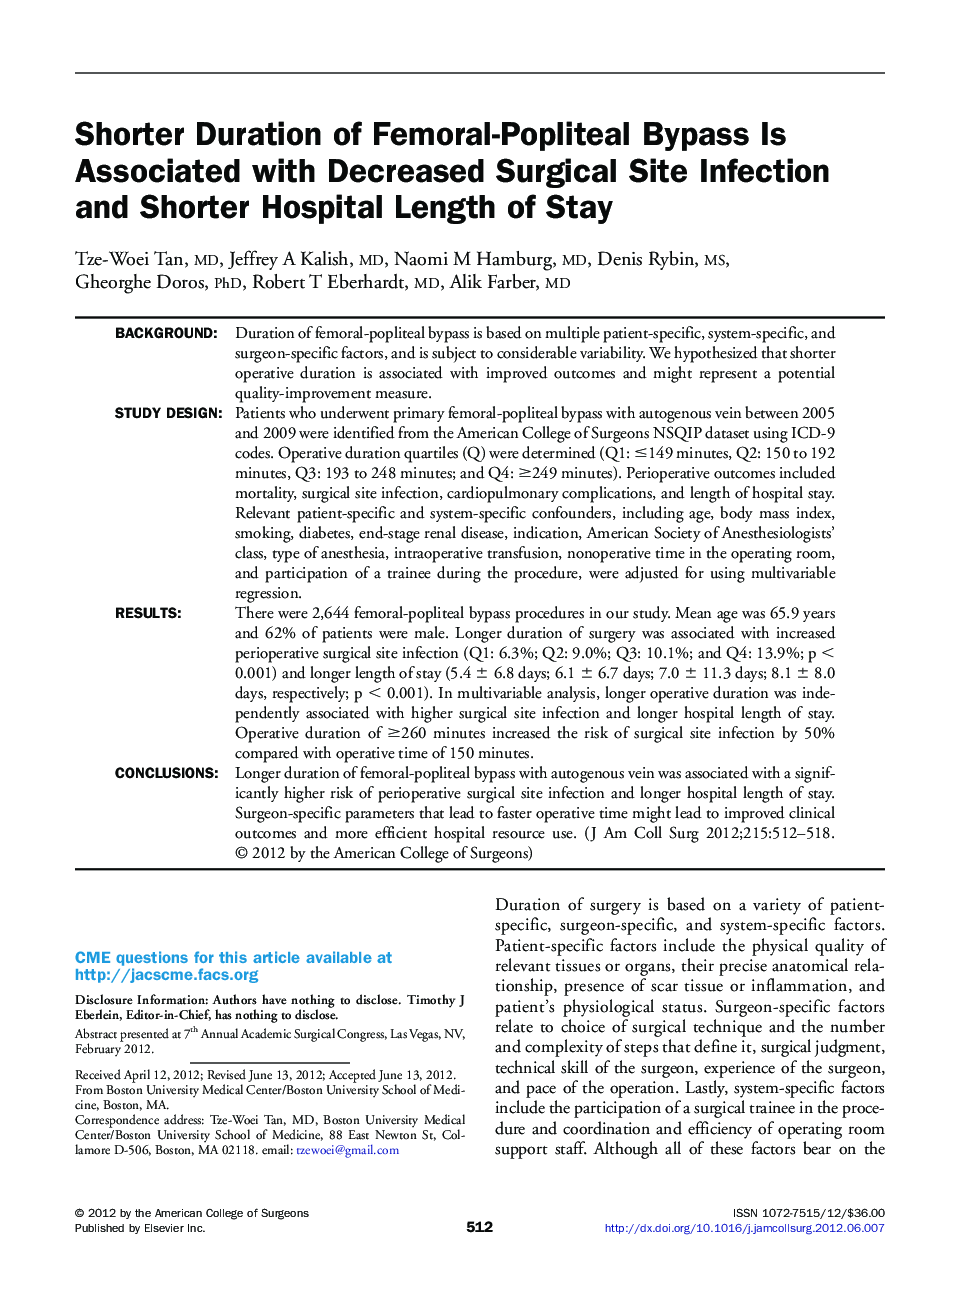 Shorter Duration of Femoral-Popliteal Bypass Is Associated with Decreased Surgical Site Infection and Shorter Hospital Length of Stay 